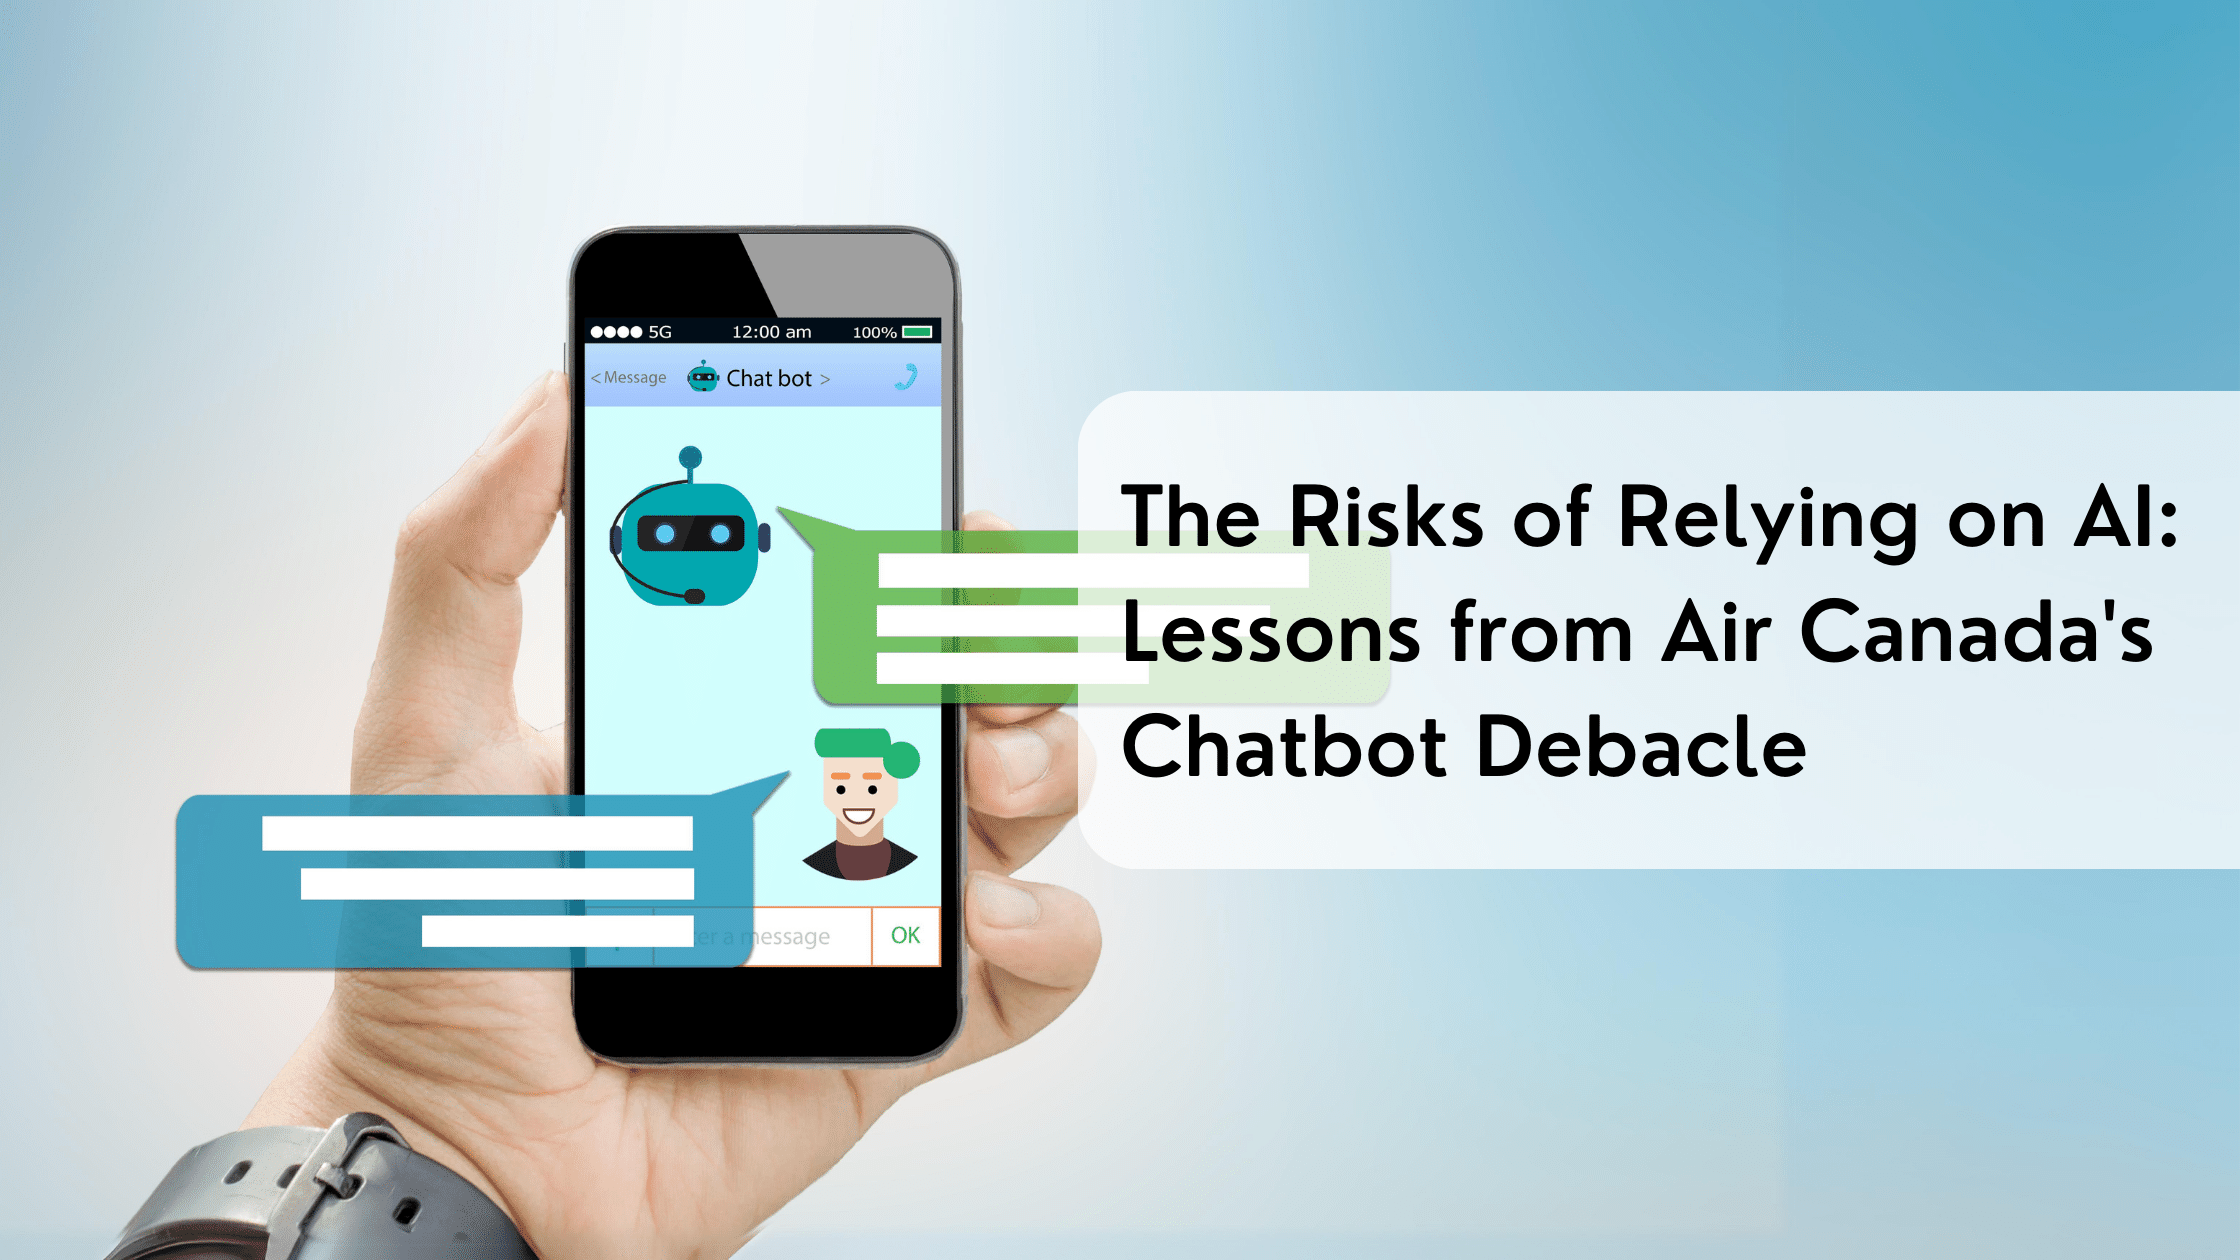 The Risks of Relying on AI: Lessons from Air Canada’s Chatbot Debacle